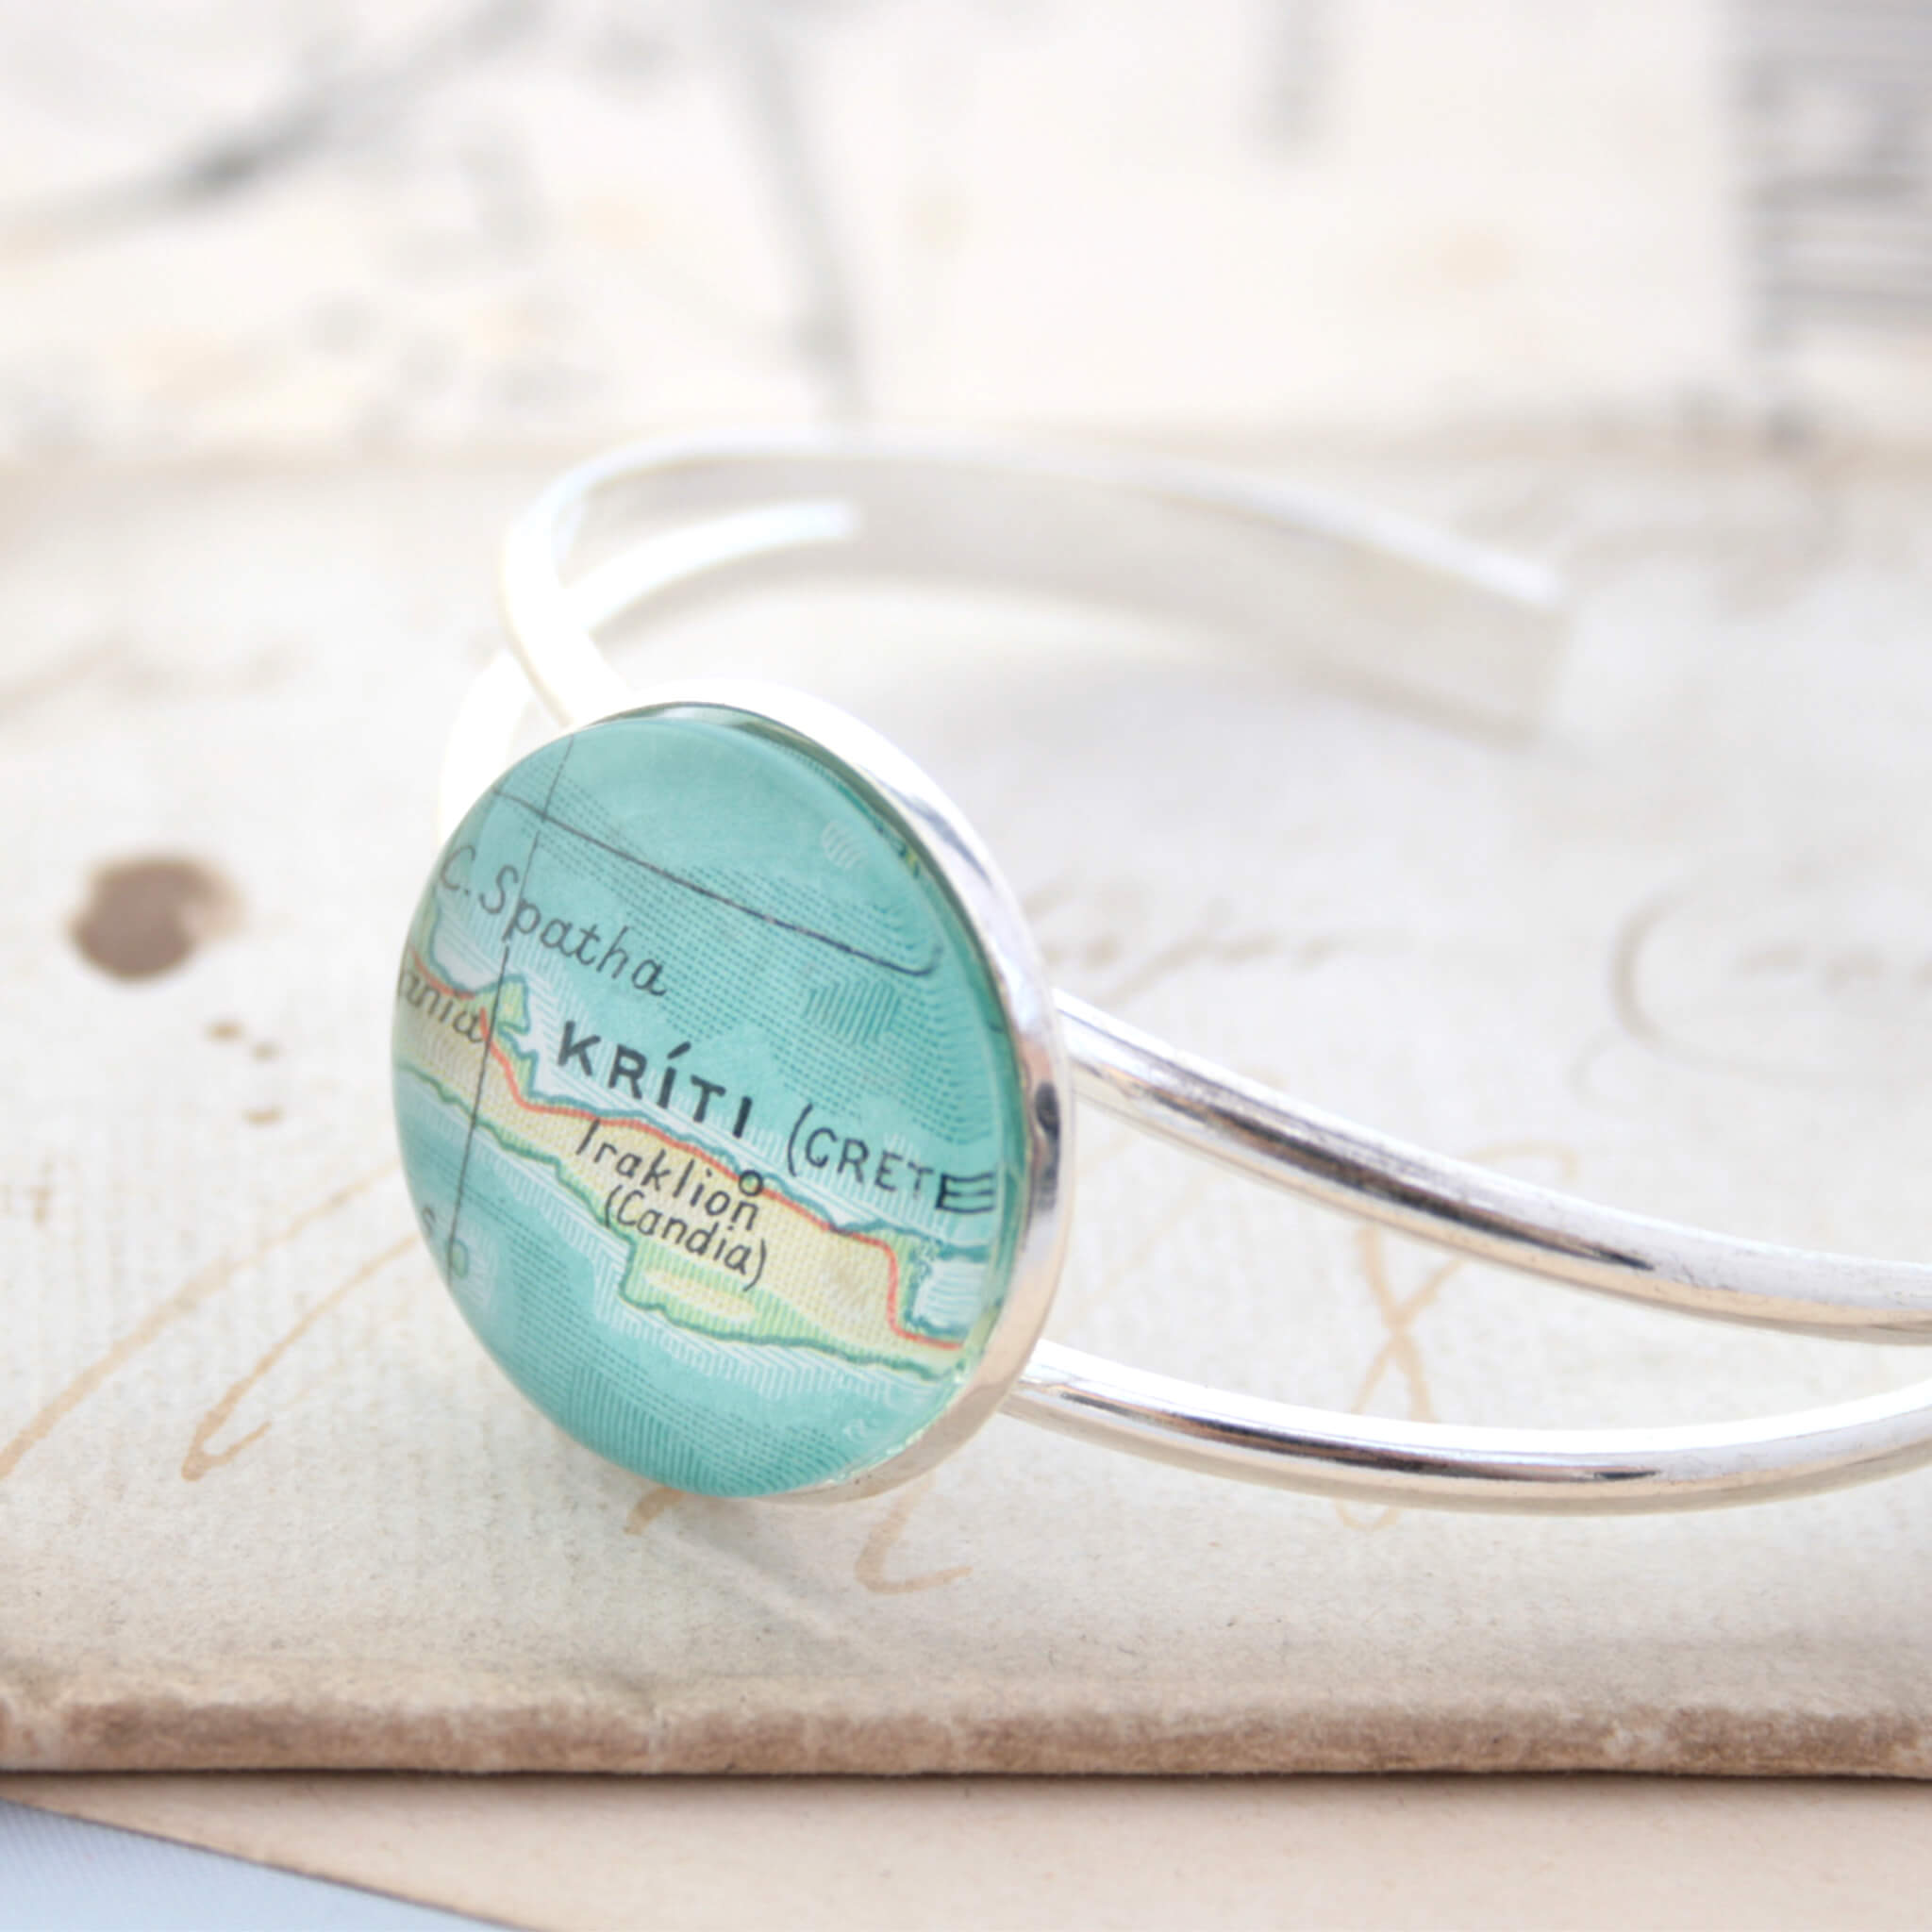 Silver bangle bracelet with geographical map of Kriti